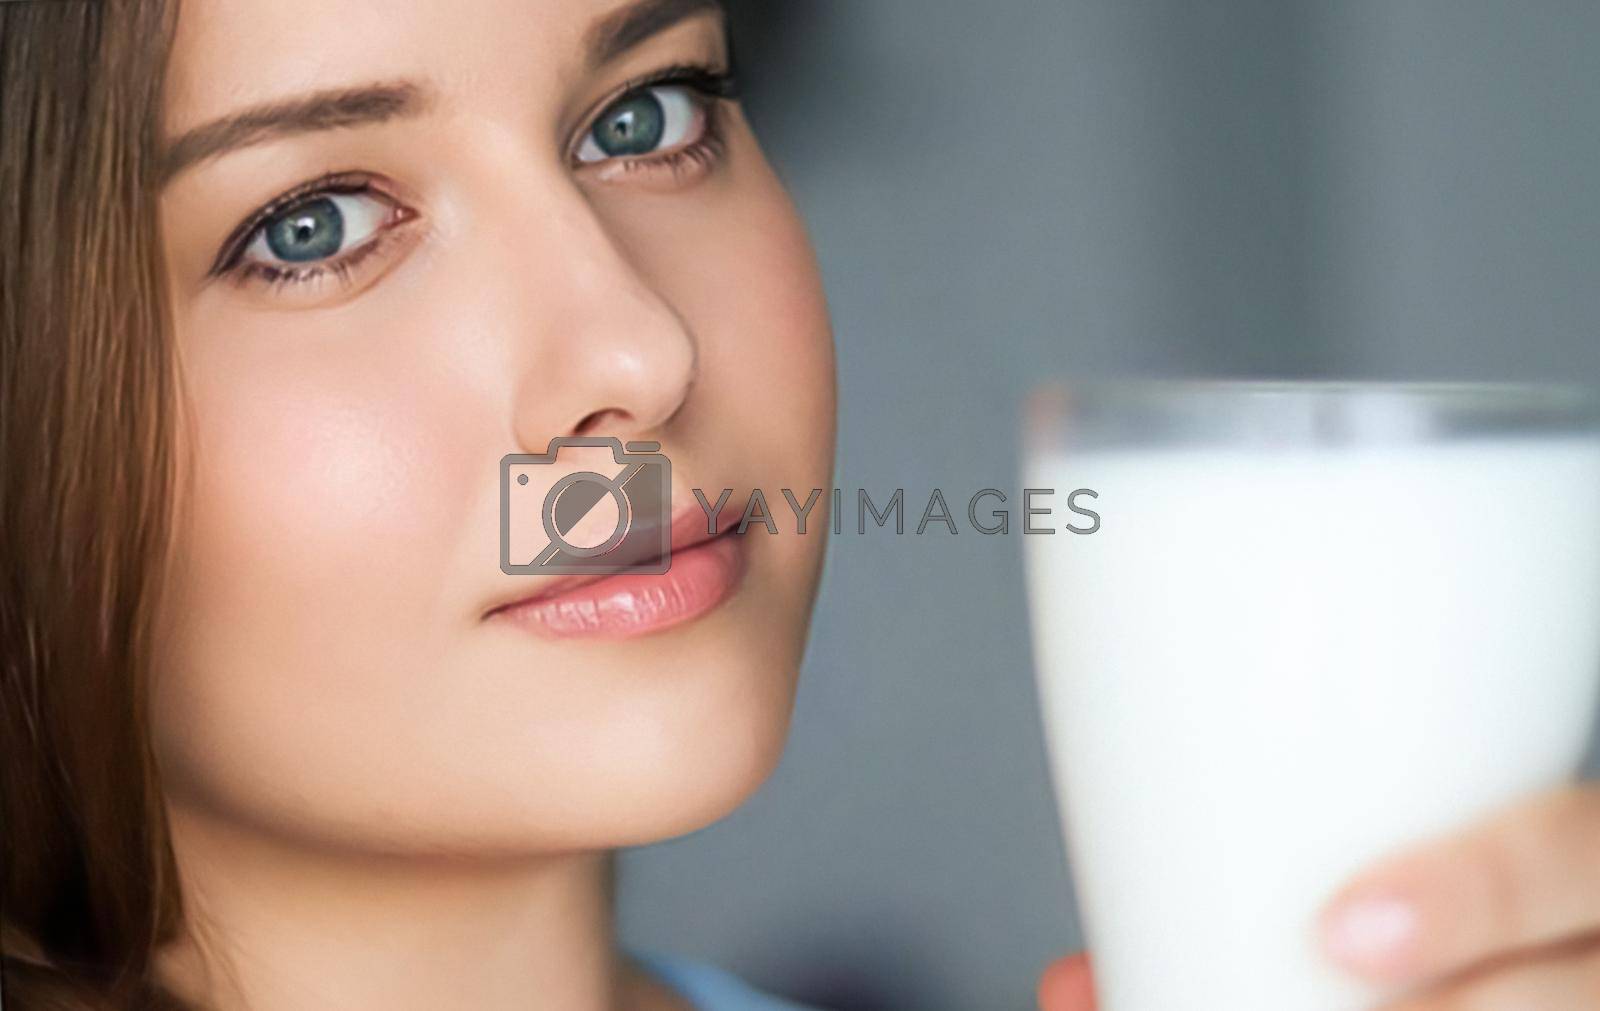 Royalty free image of Diet and wellness, young woman with glass of milk or protein shake cocktail by Anneleven